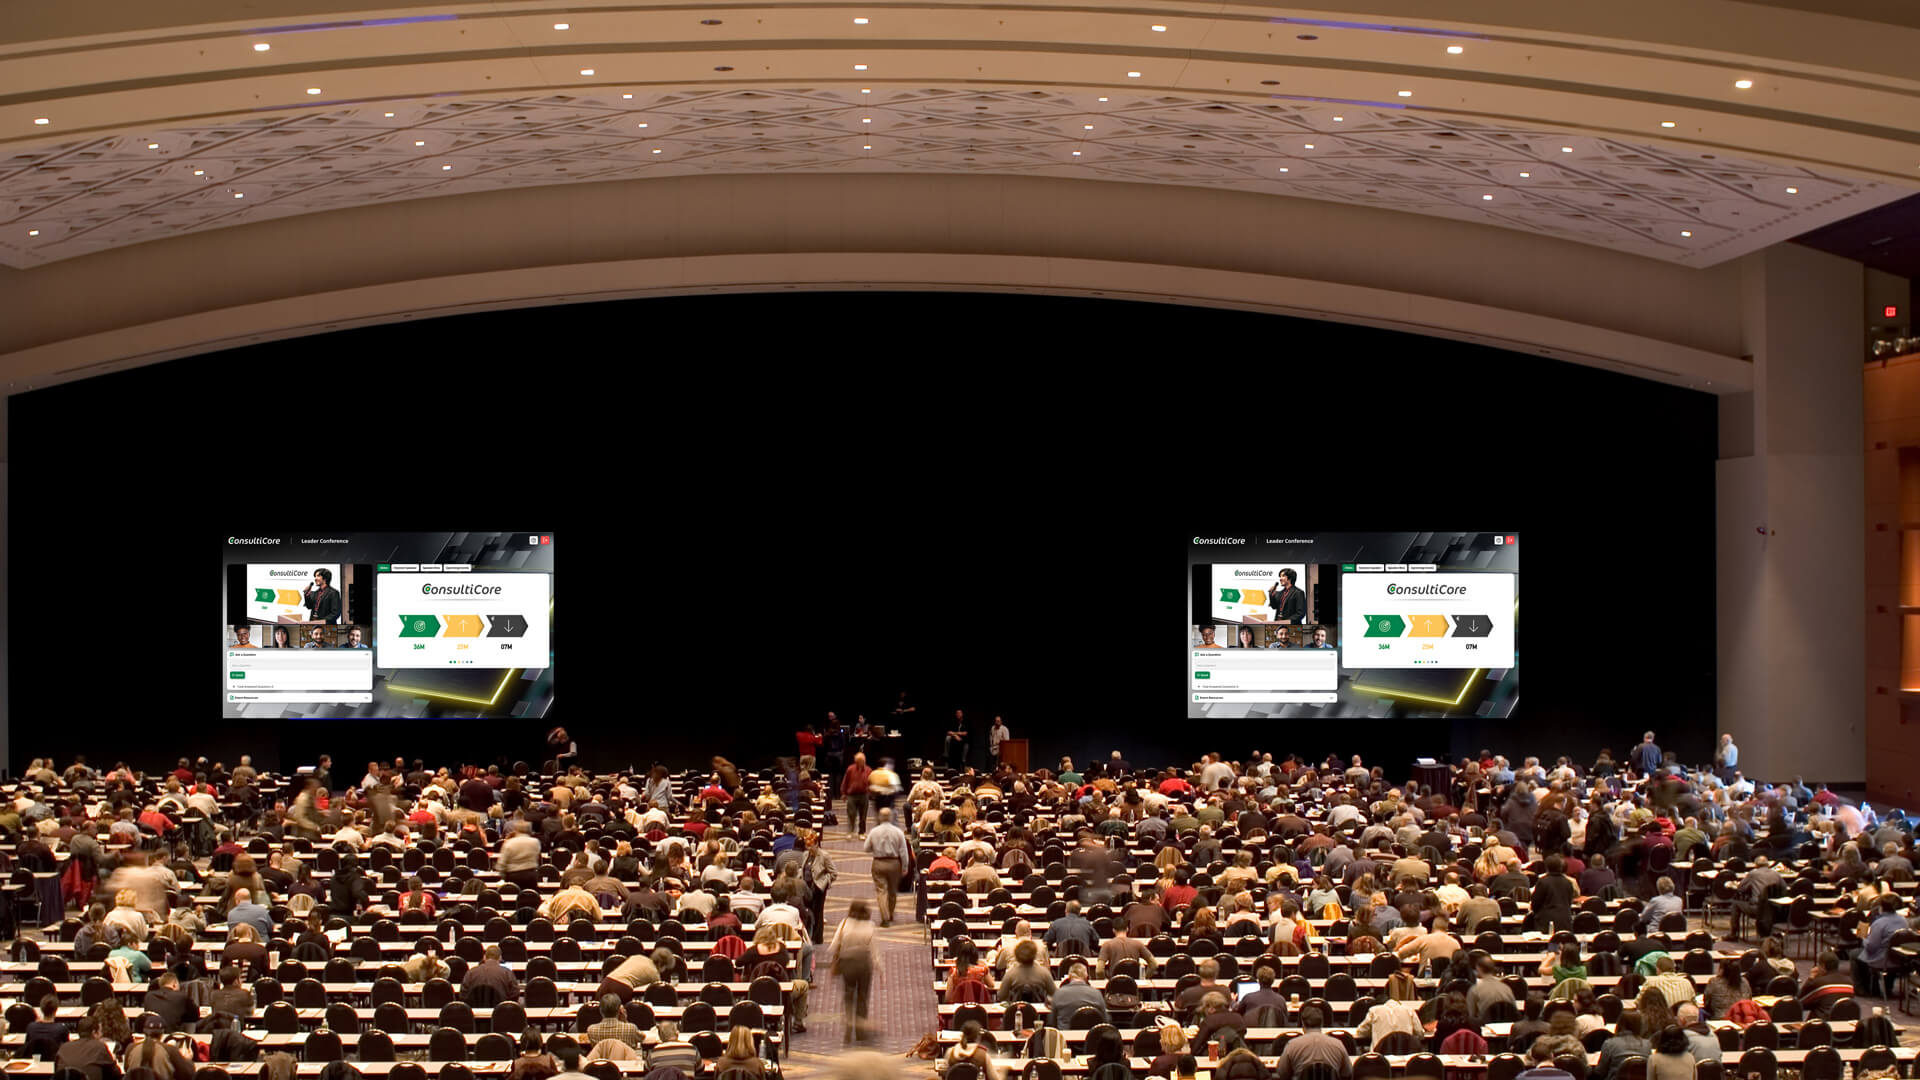 Hybrid Event showing Large Auditorium with with audience looking at screens of the online presentation